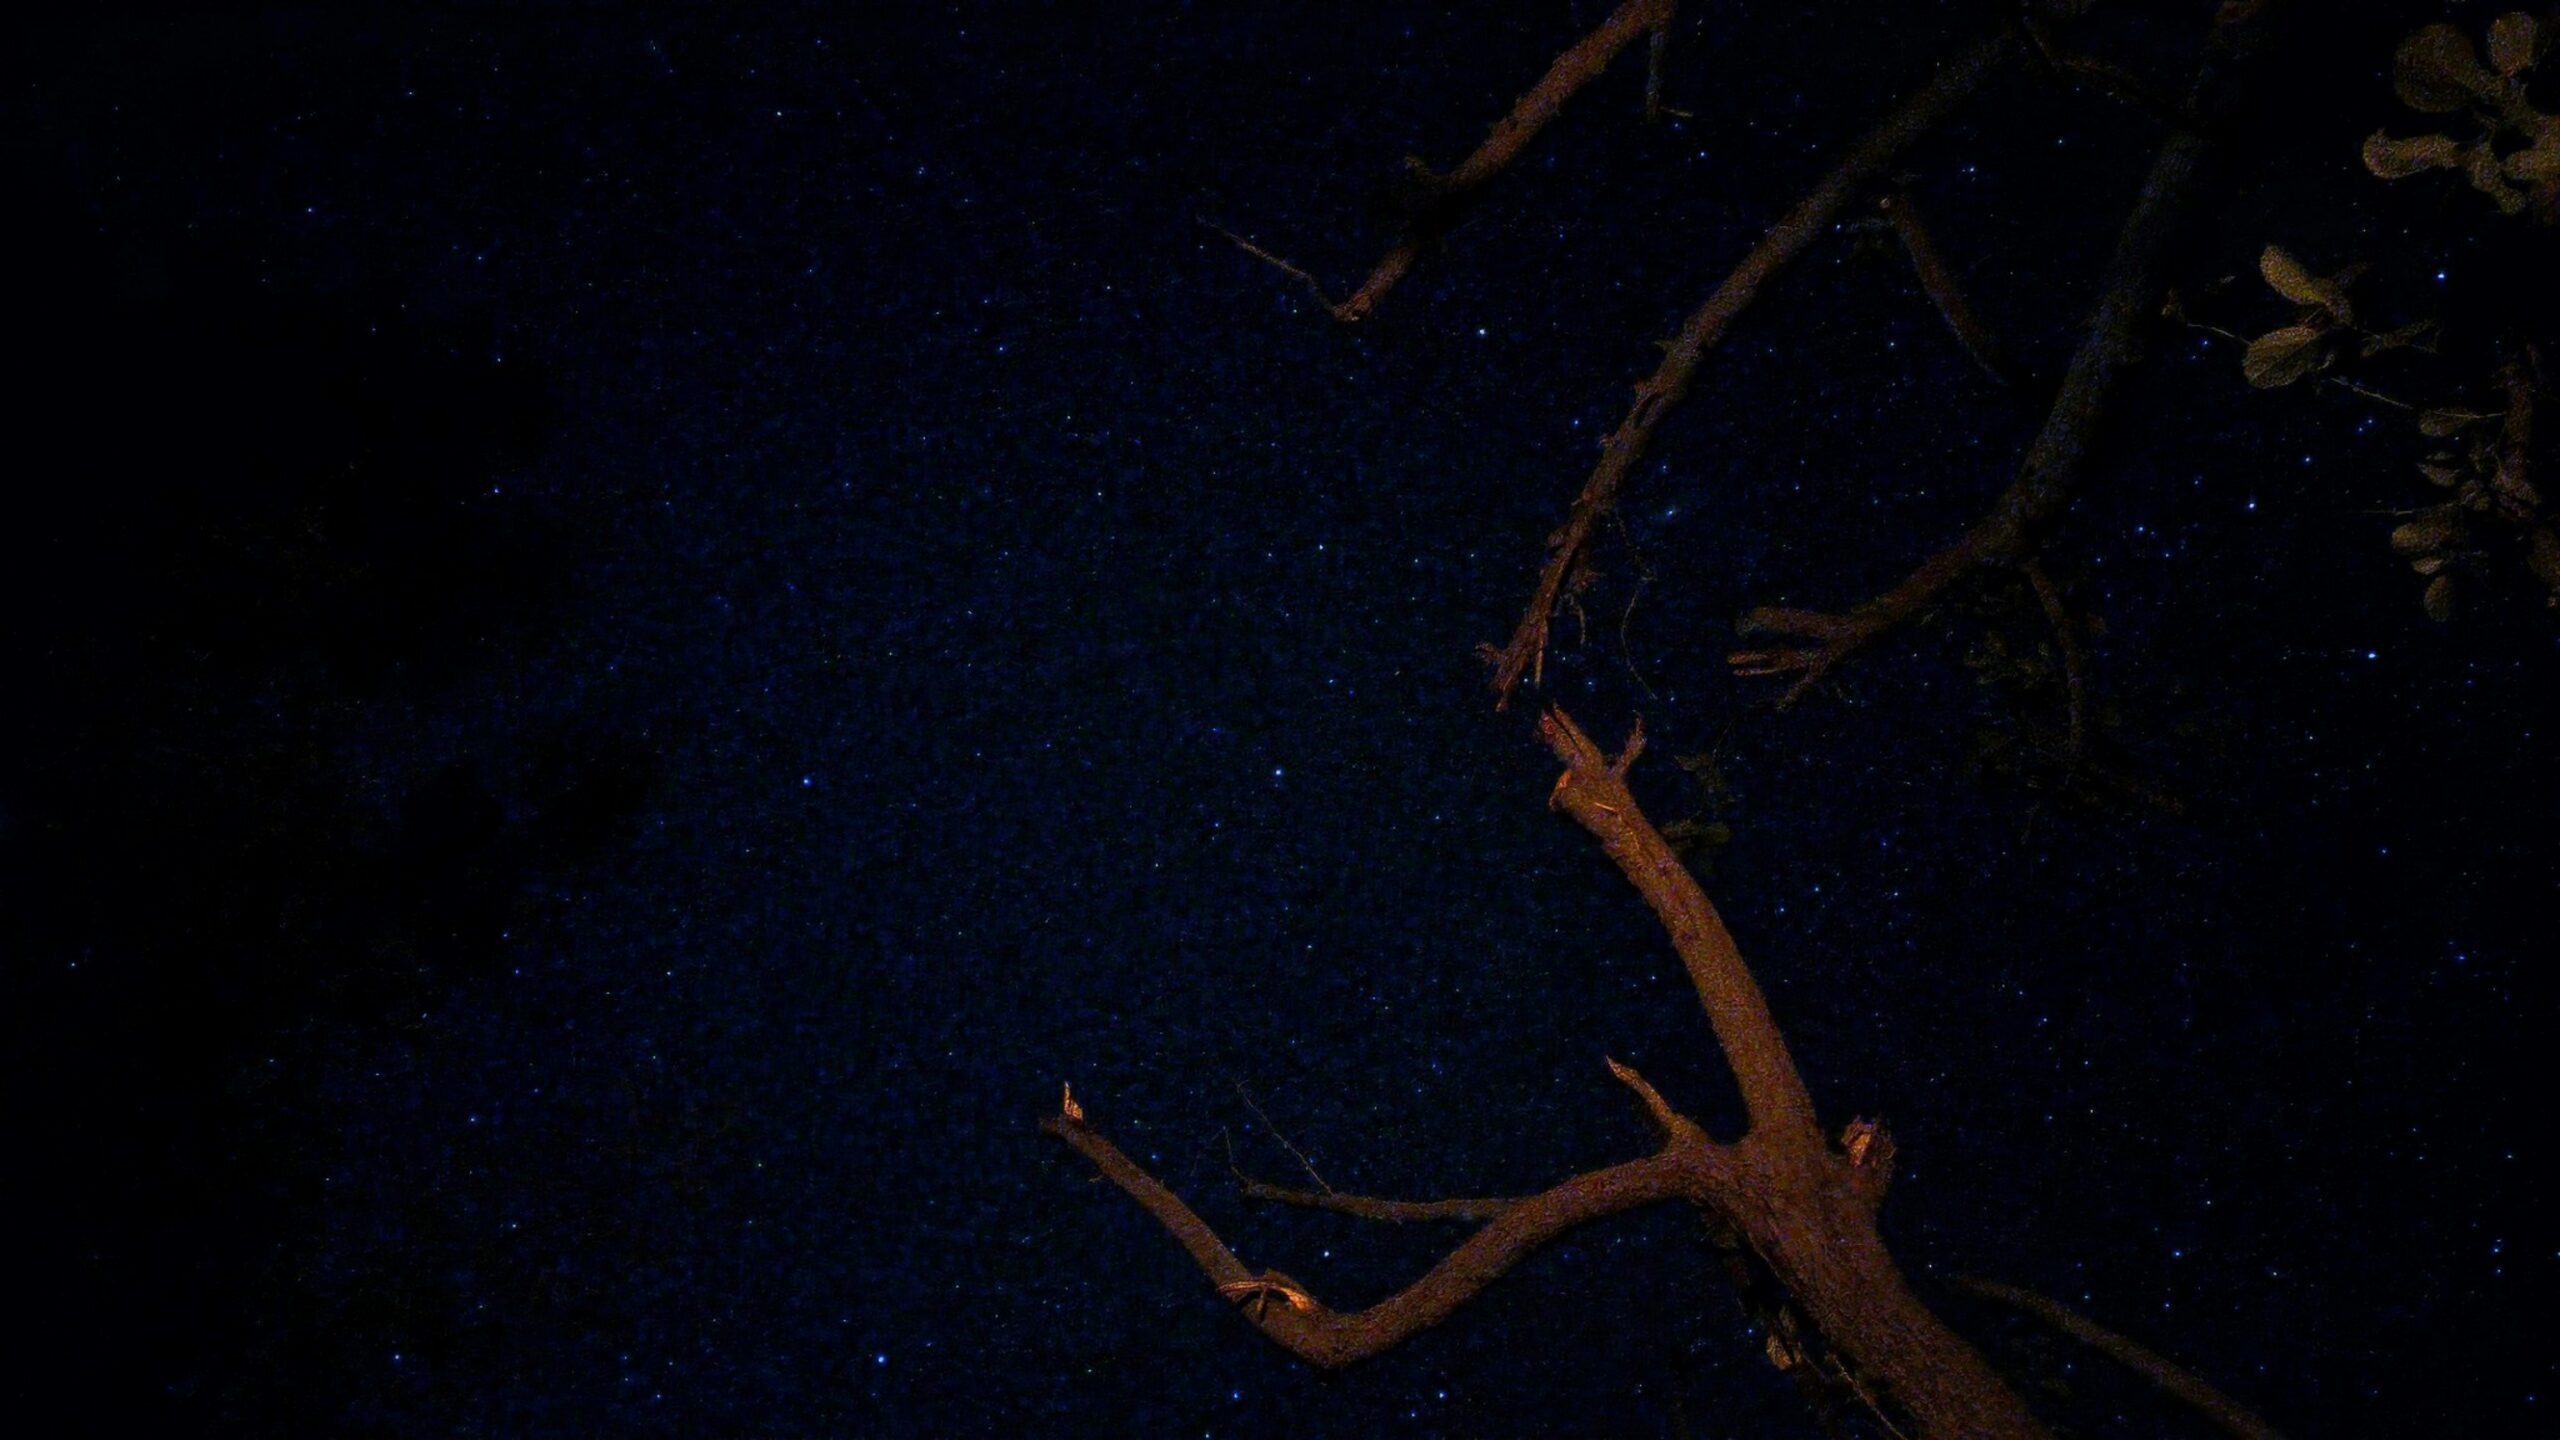 A tree branch in the dark with stars in the sky